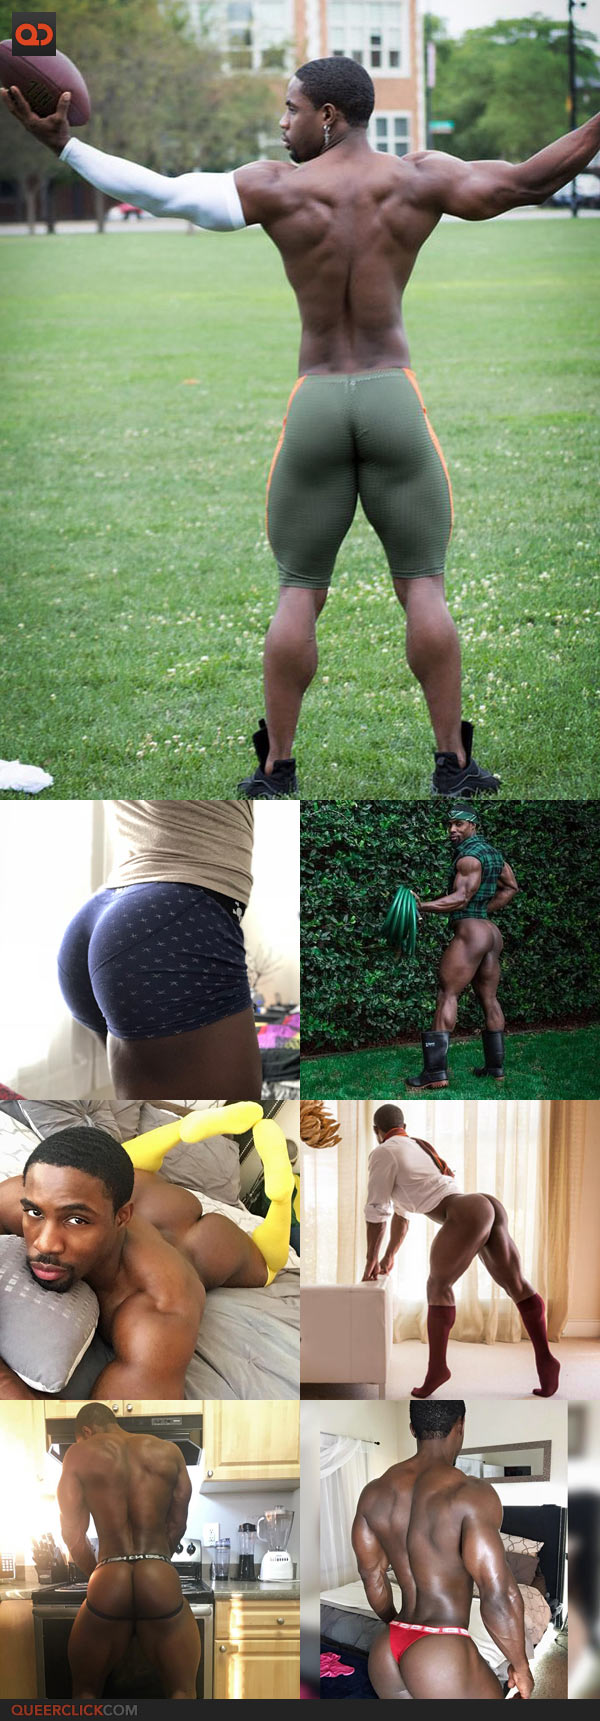 Ten Best Muscle Butts From Instagram You Need To Follow Right Now! – Part 3